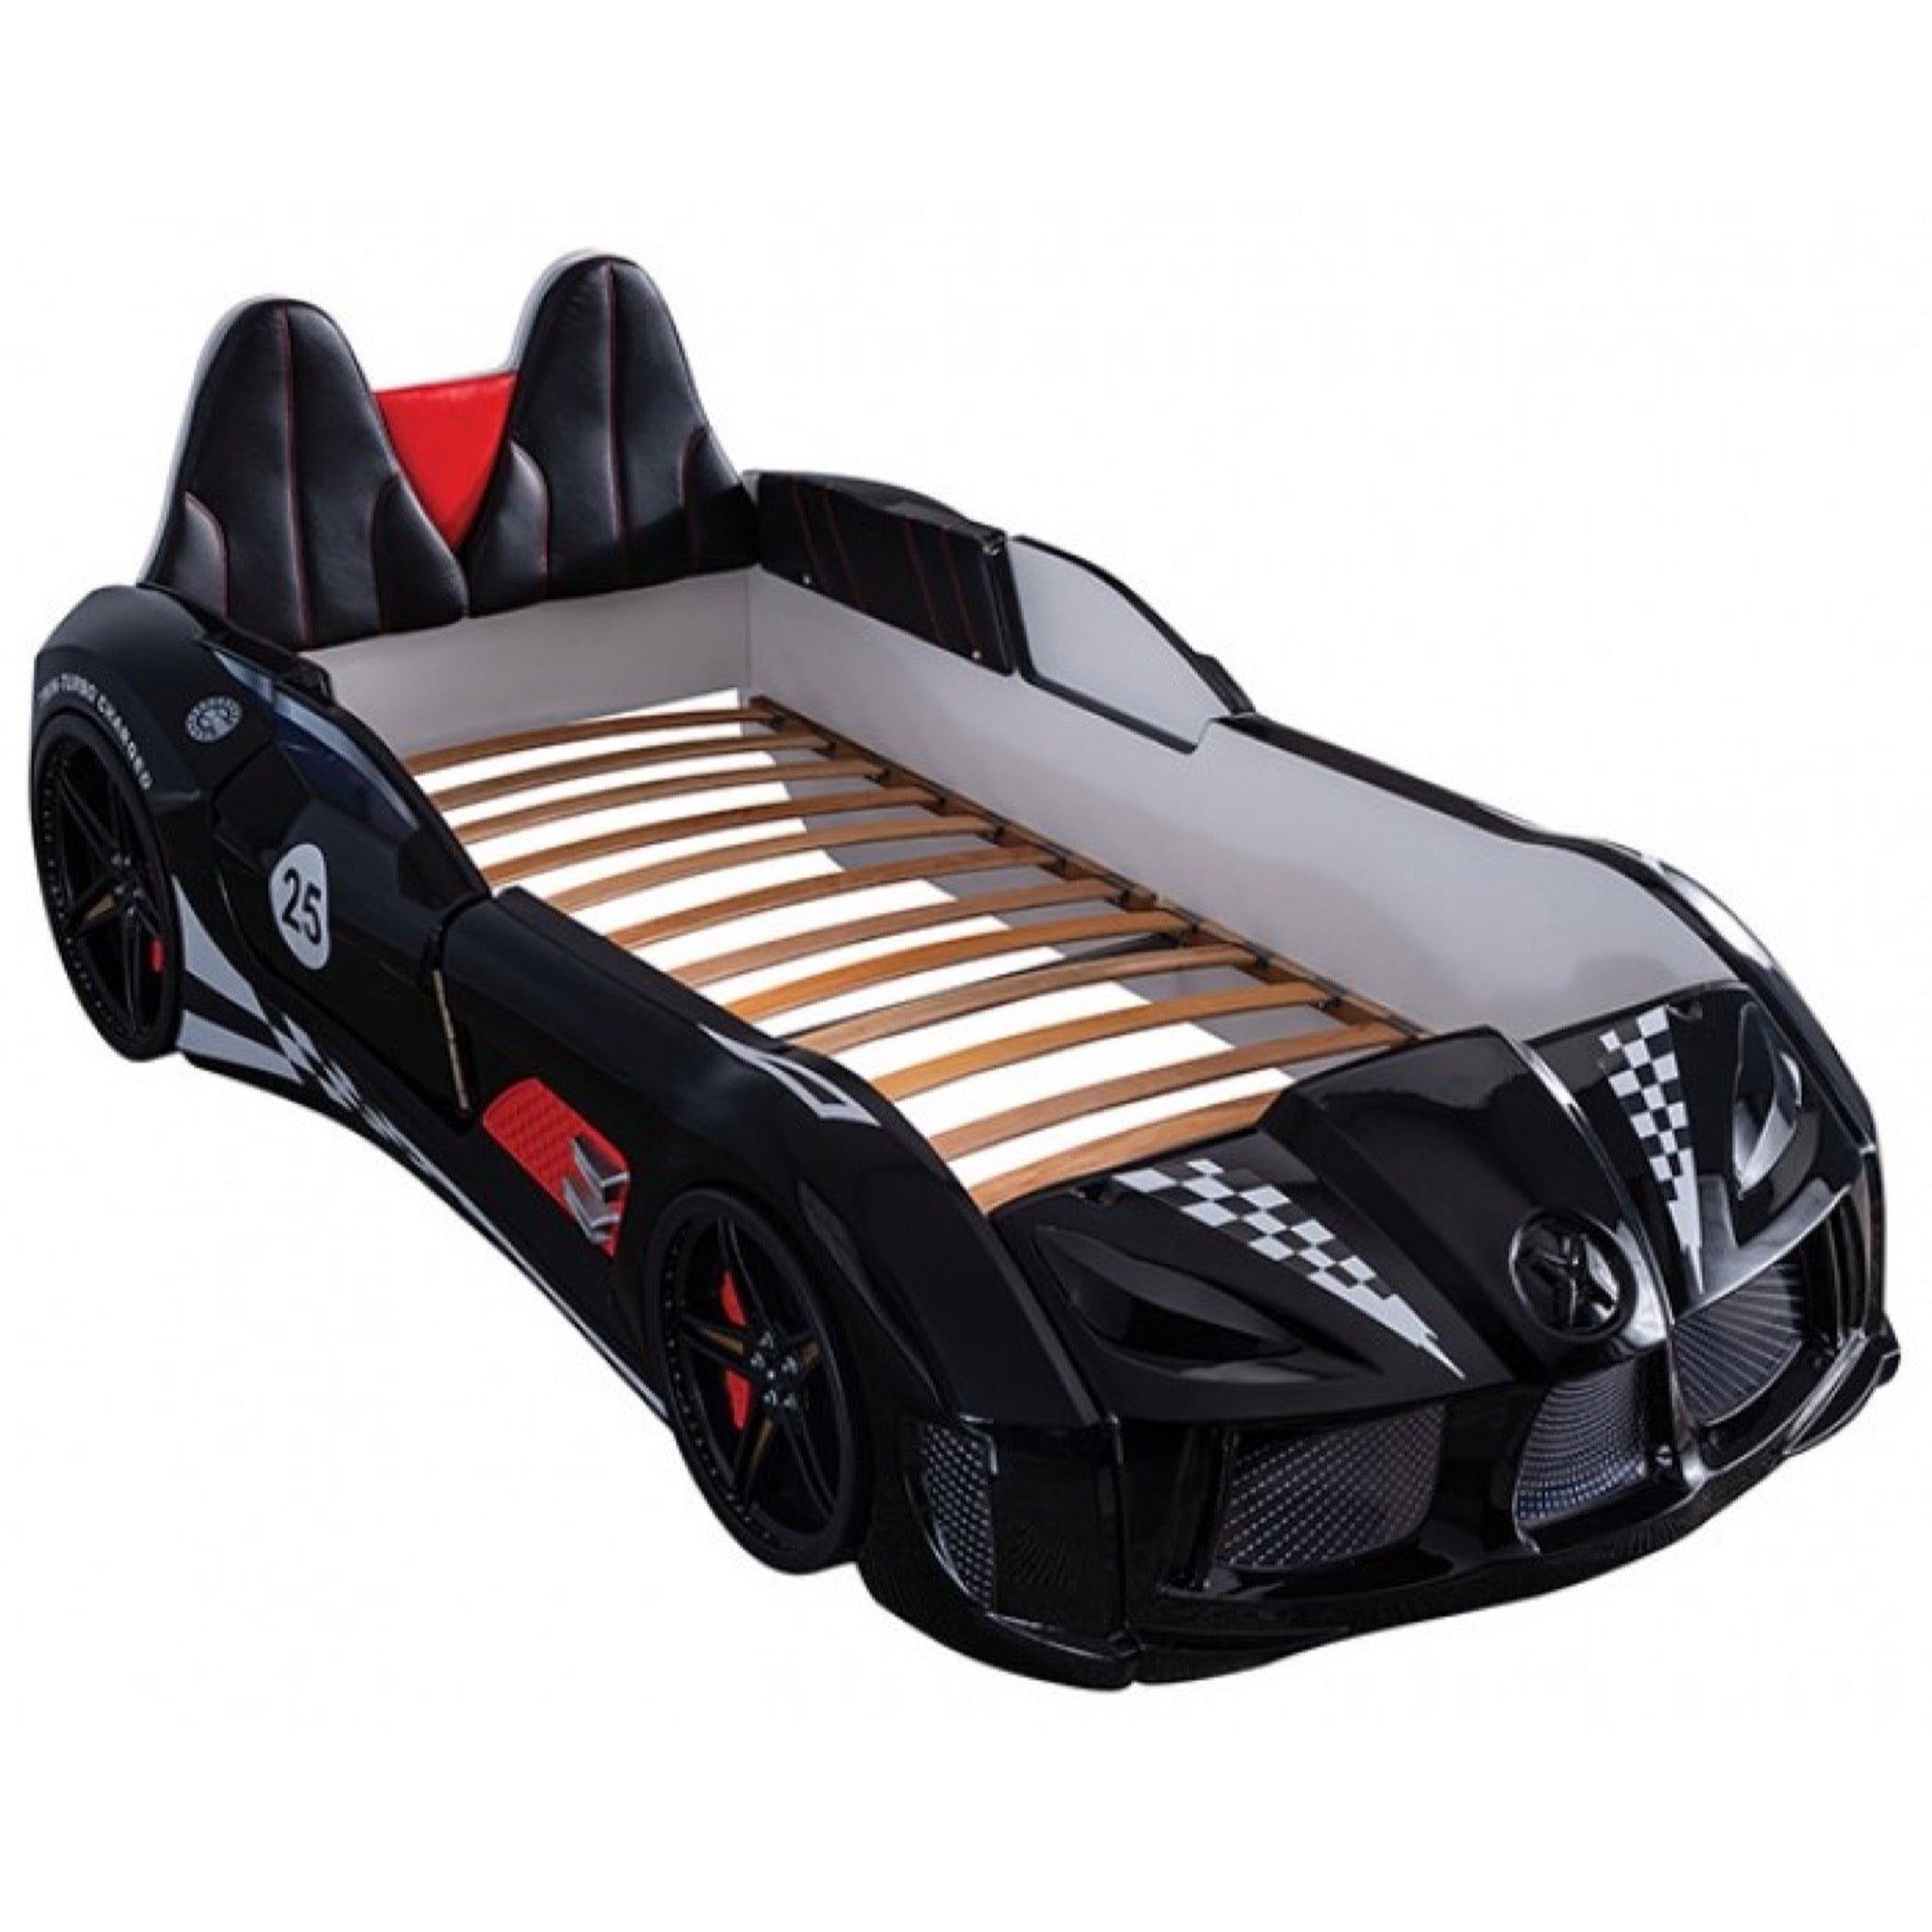 Trackster Kid's Race Car Bed with LED Lights